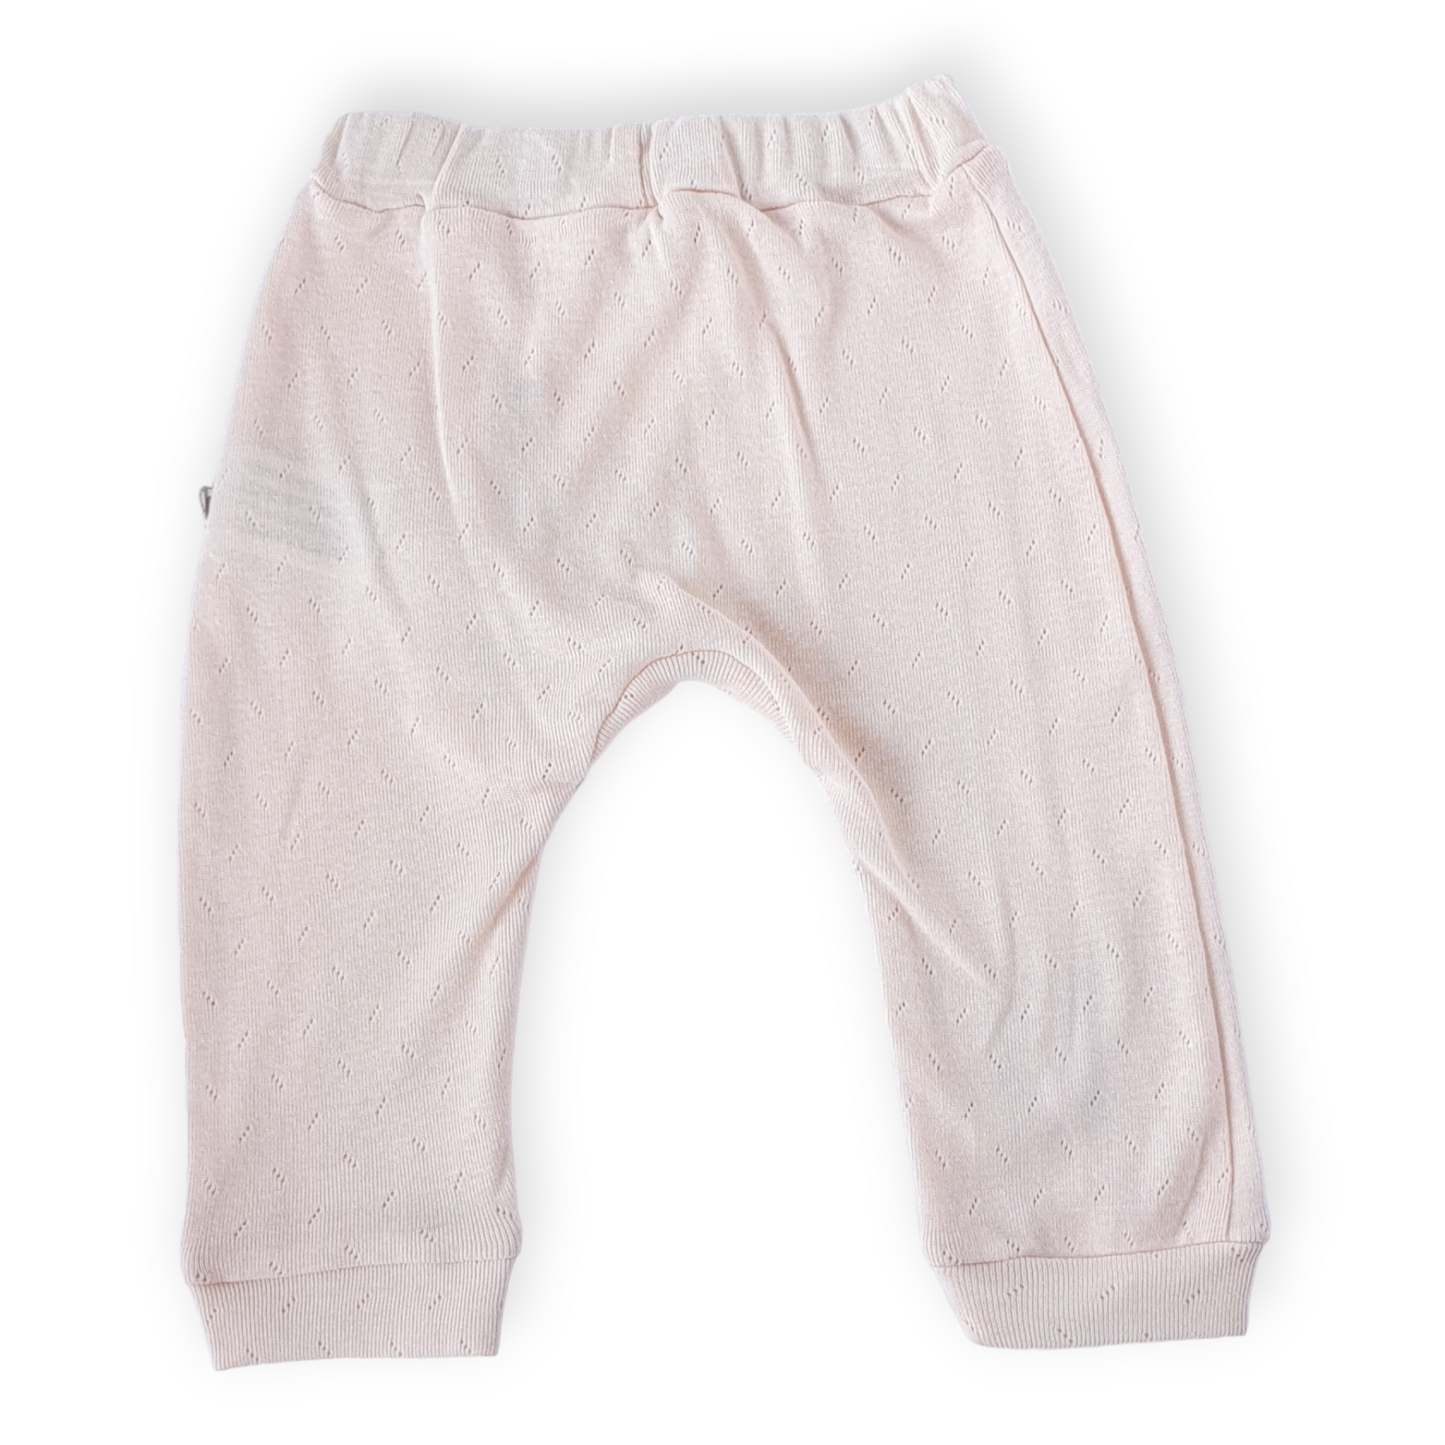 Basic Light Pink Footless Pants with Penguins-Animals, Catgirl, Footless, Girl, Pants, Pink, SS23-BiBaby-[Too Twee]-[Tootwee]-[baby]-[newborn]-[clothes]-[essentials]-[toys]-[Lebanon]